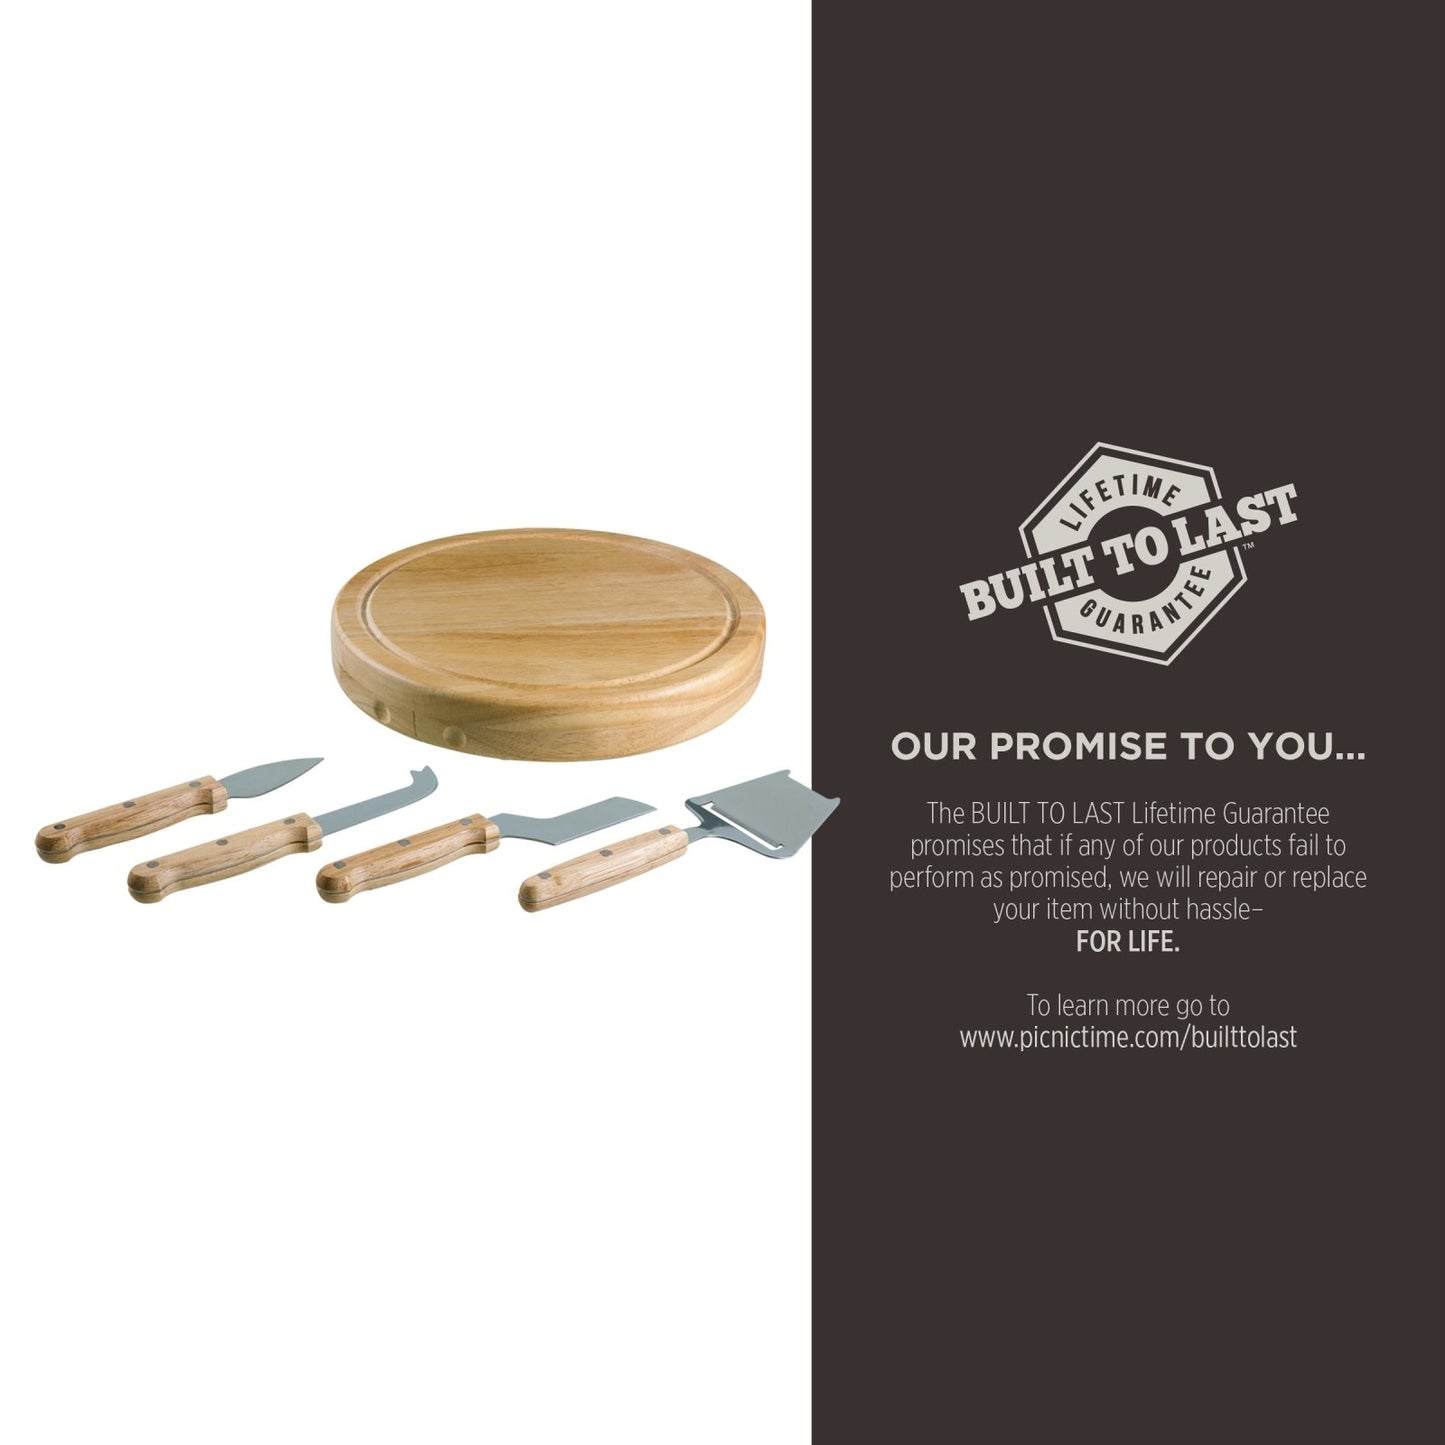 The One Ring Cheese Board and Tools Set - The Fourth Place